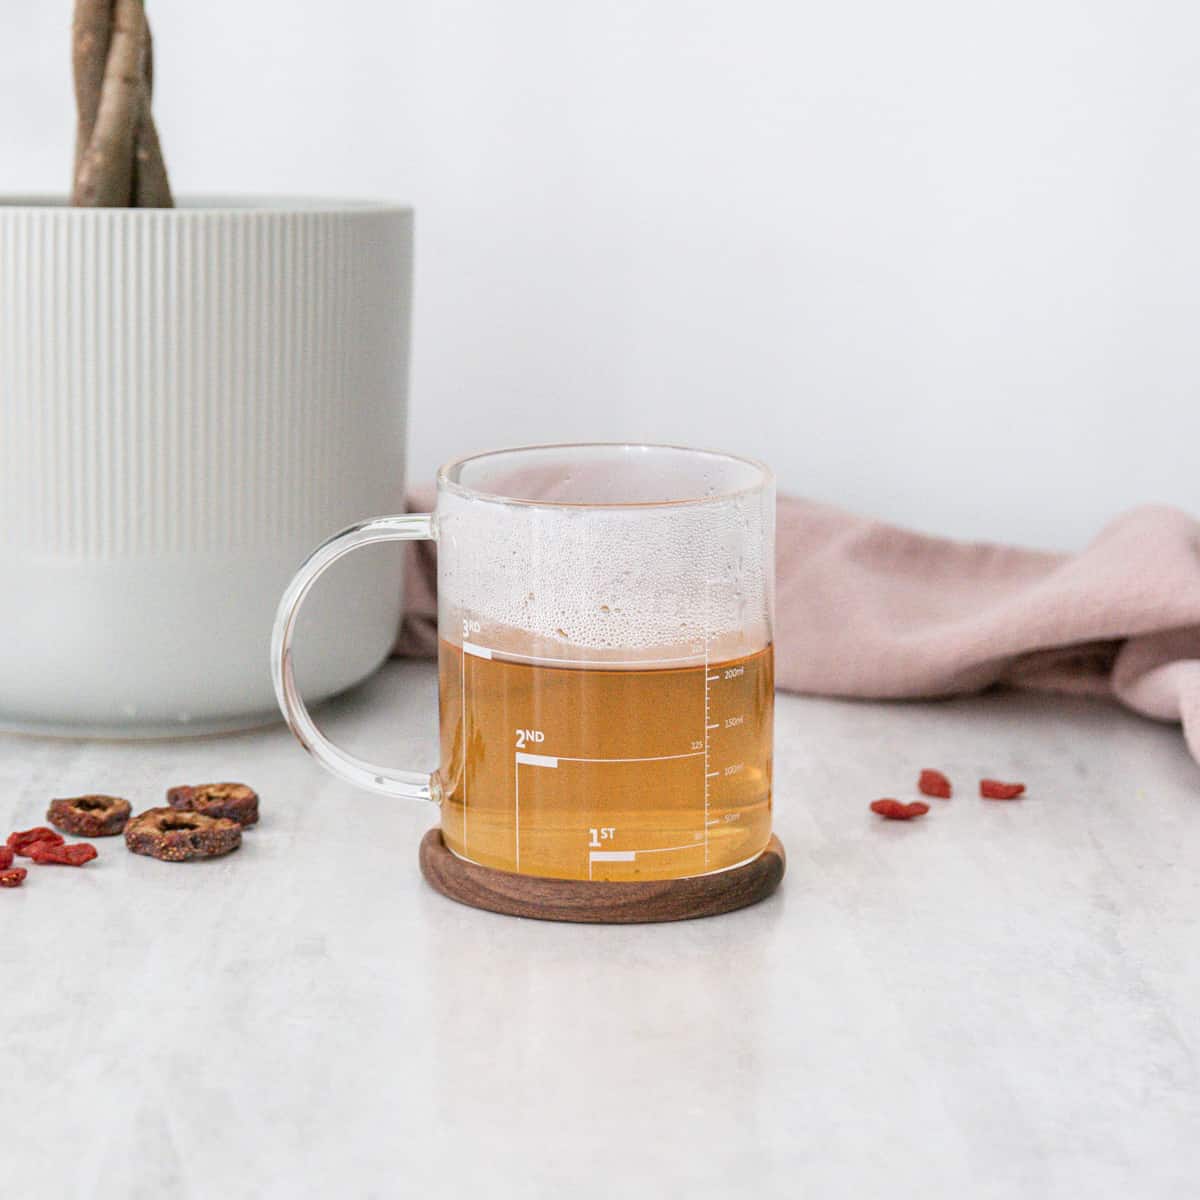 Three Reds Digestive Tea (Chinese Medicine Digestion) with goji berries, Hawthorne berries, red dates, and organic licorice root